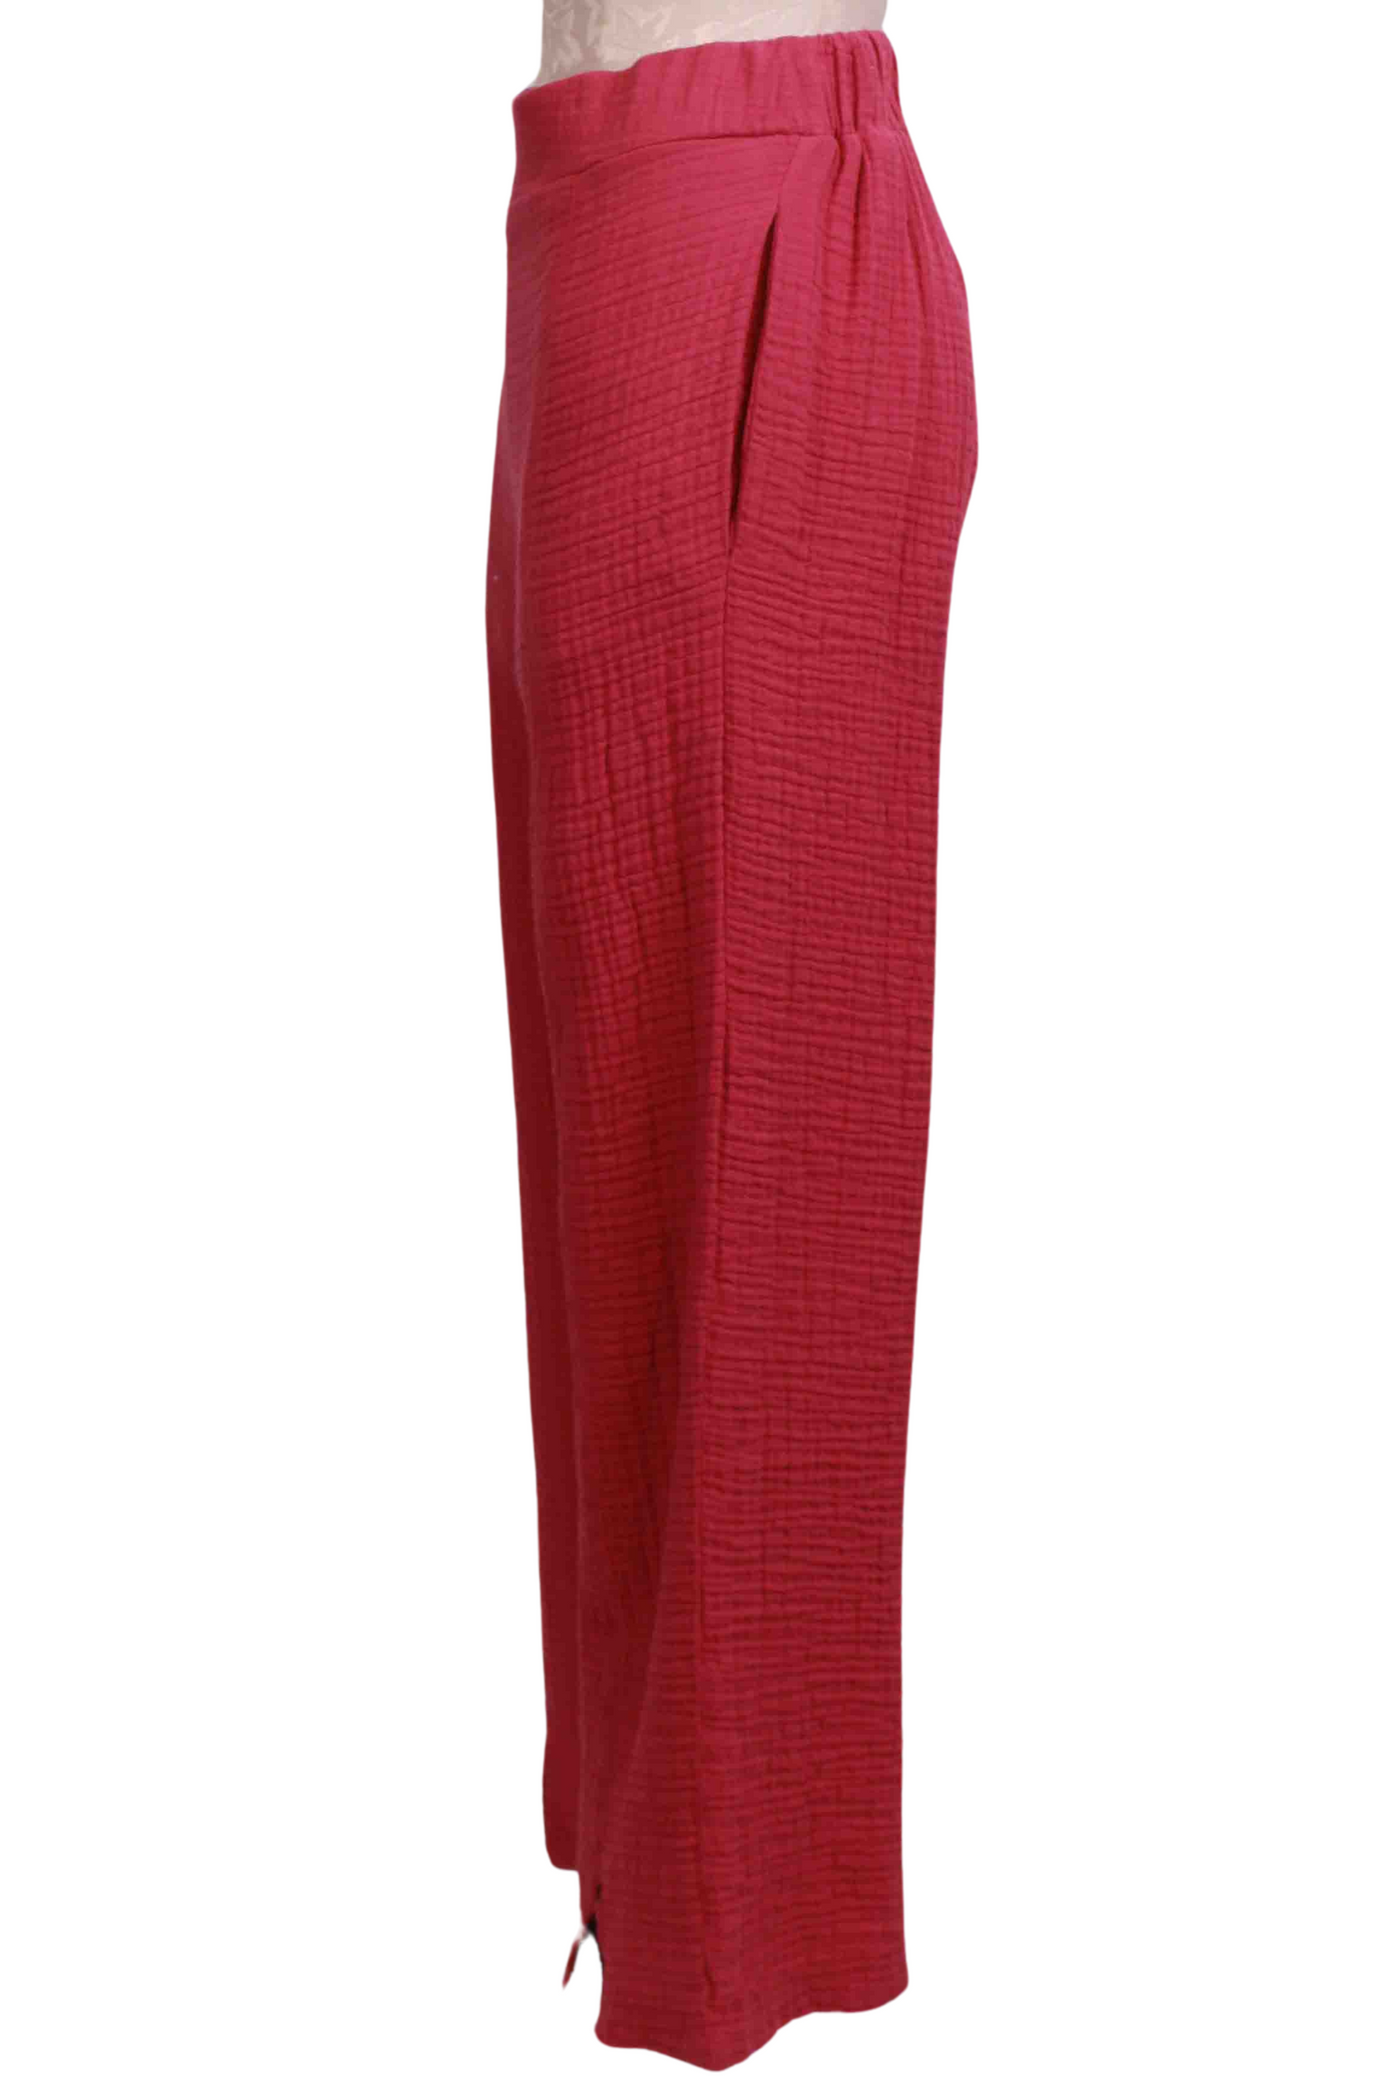 side view of Raspberry Harmony Gauzy Cotton Pant by Kozan with a vent detail at the hemline